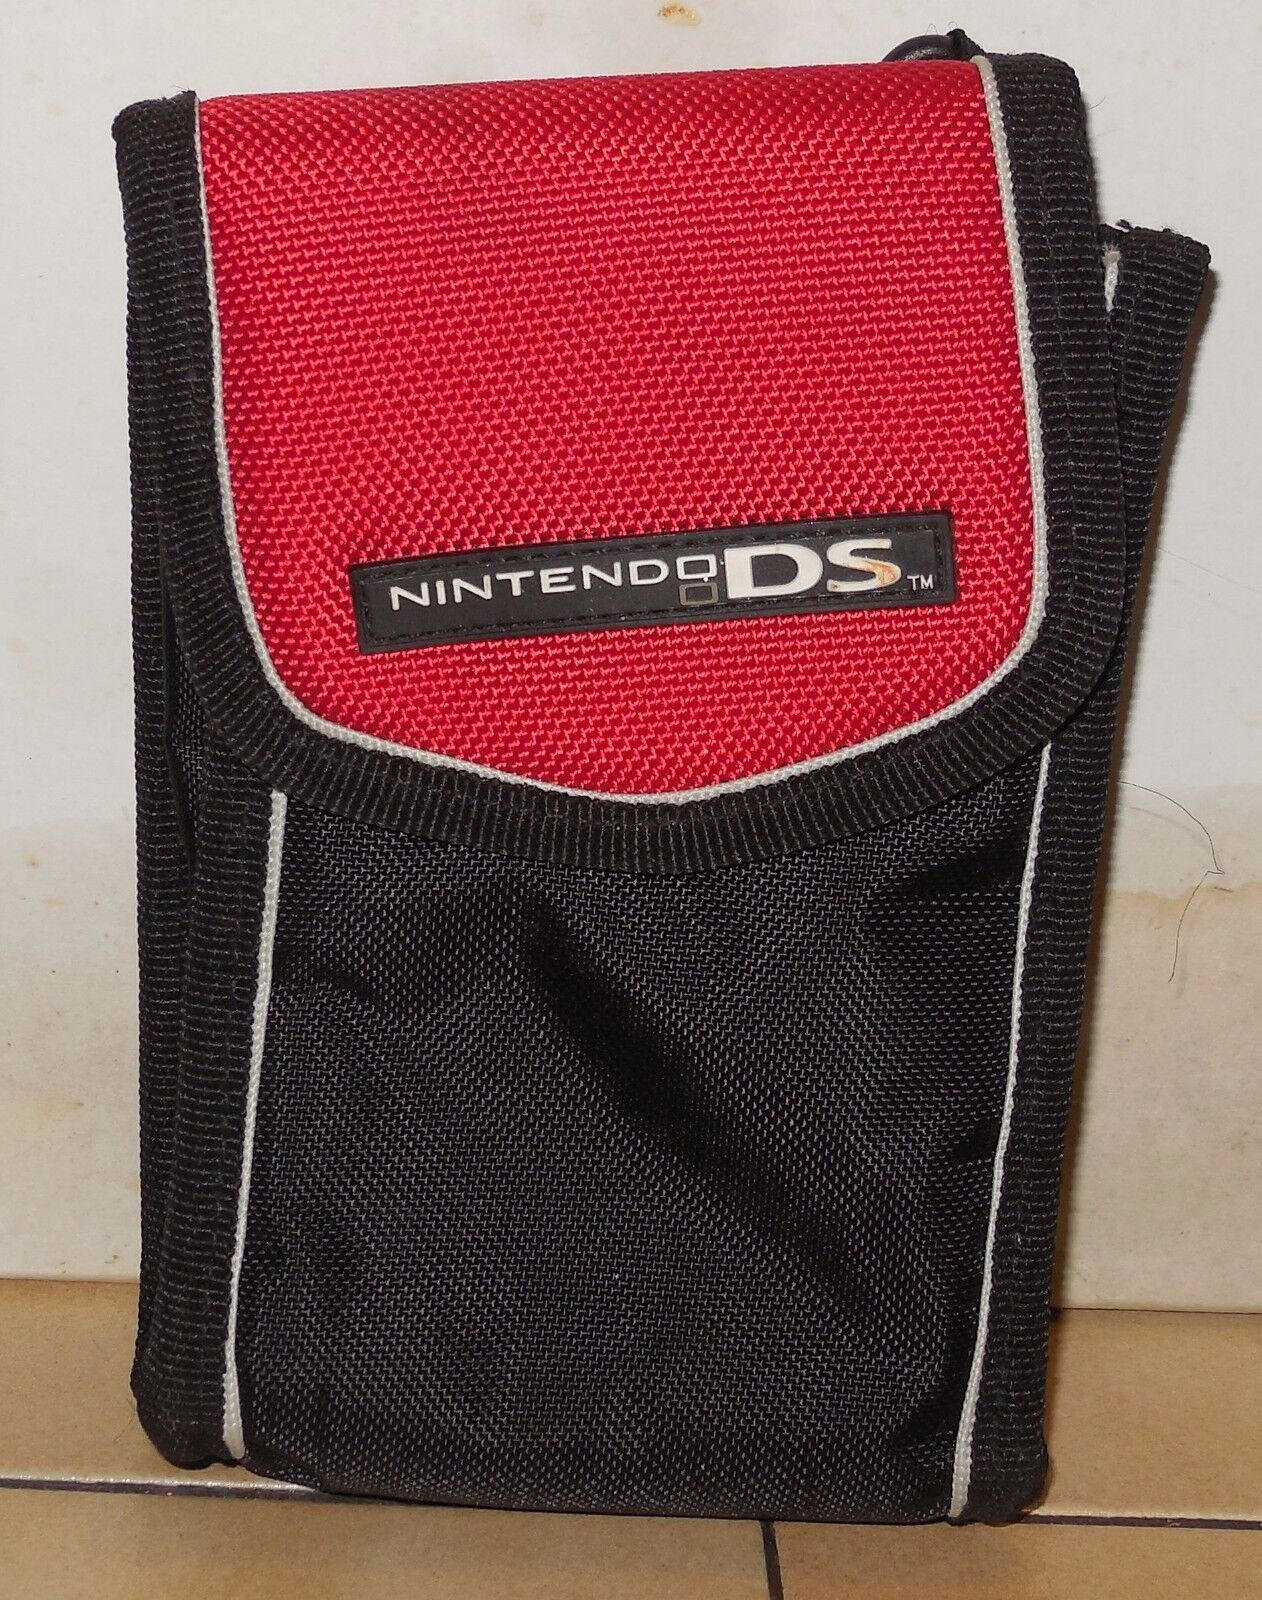 Primary image for Nintendo DS Red Carrying Case